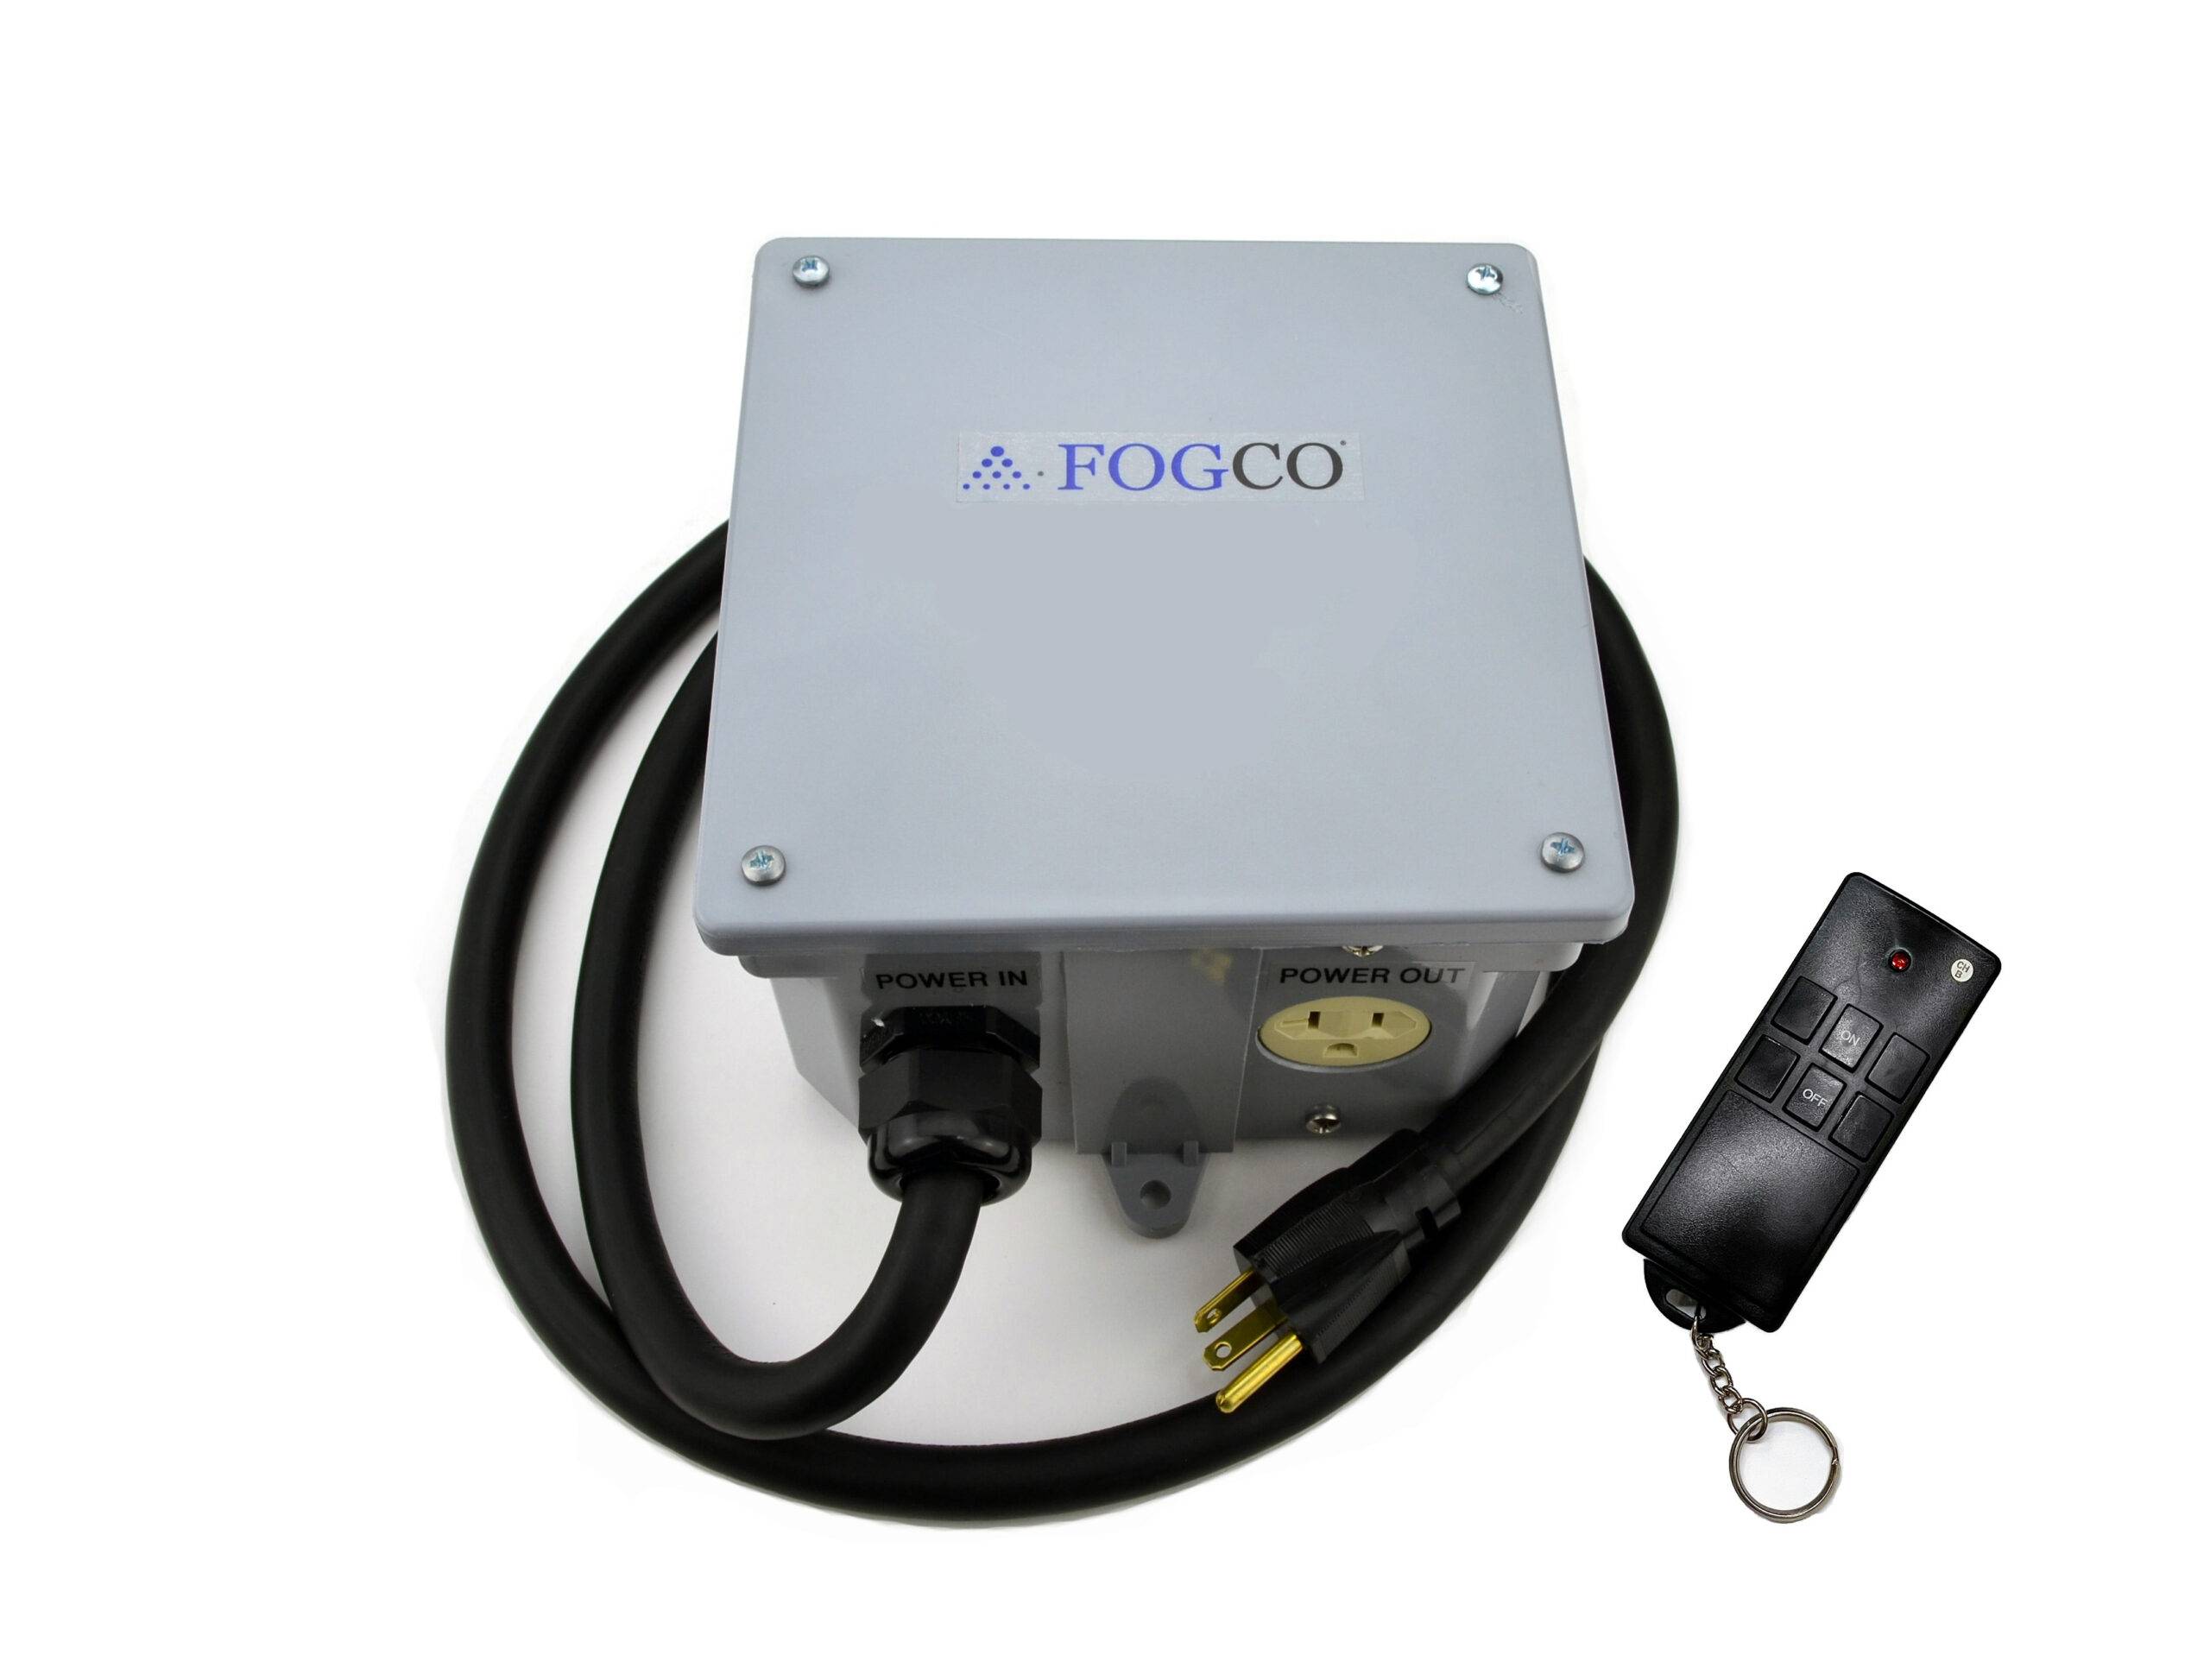 https://fogco.com/wp-content/uploads/2015/03/Universal-Remote-Control-Box-with-remote-scaled.jpg